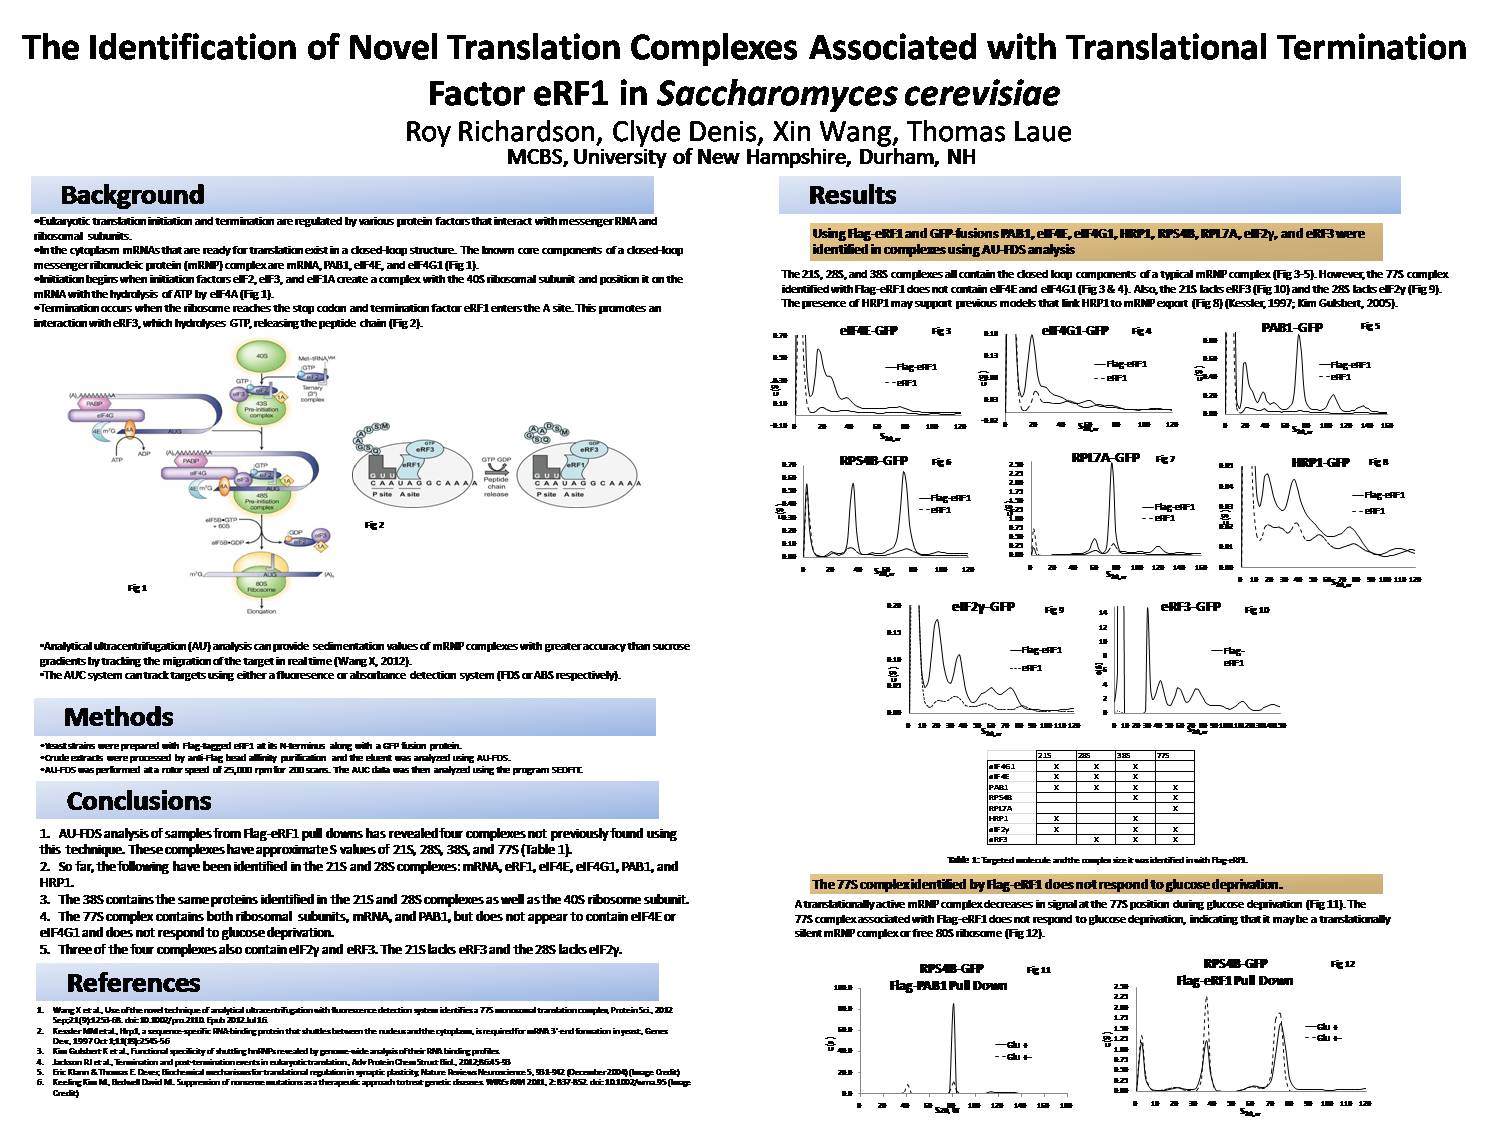 The Identification Of Novel Translation Complexes Associated With Translational Termination Factor Erf1 In Saccharomyces Cerevisiae by rvx3